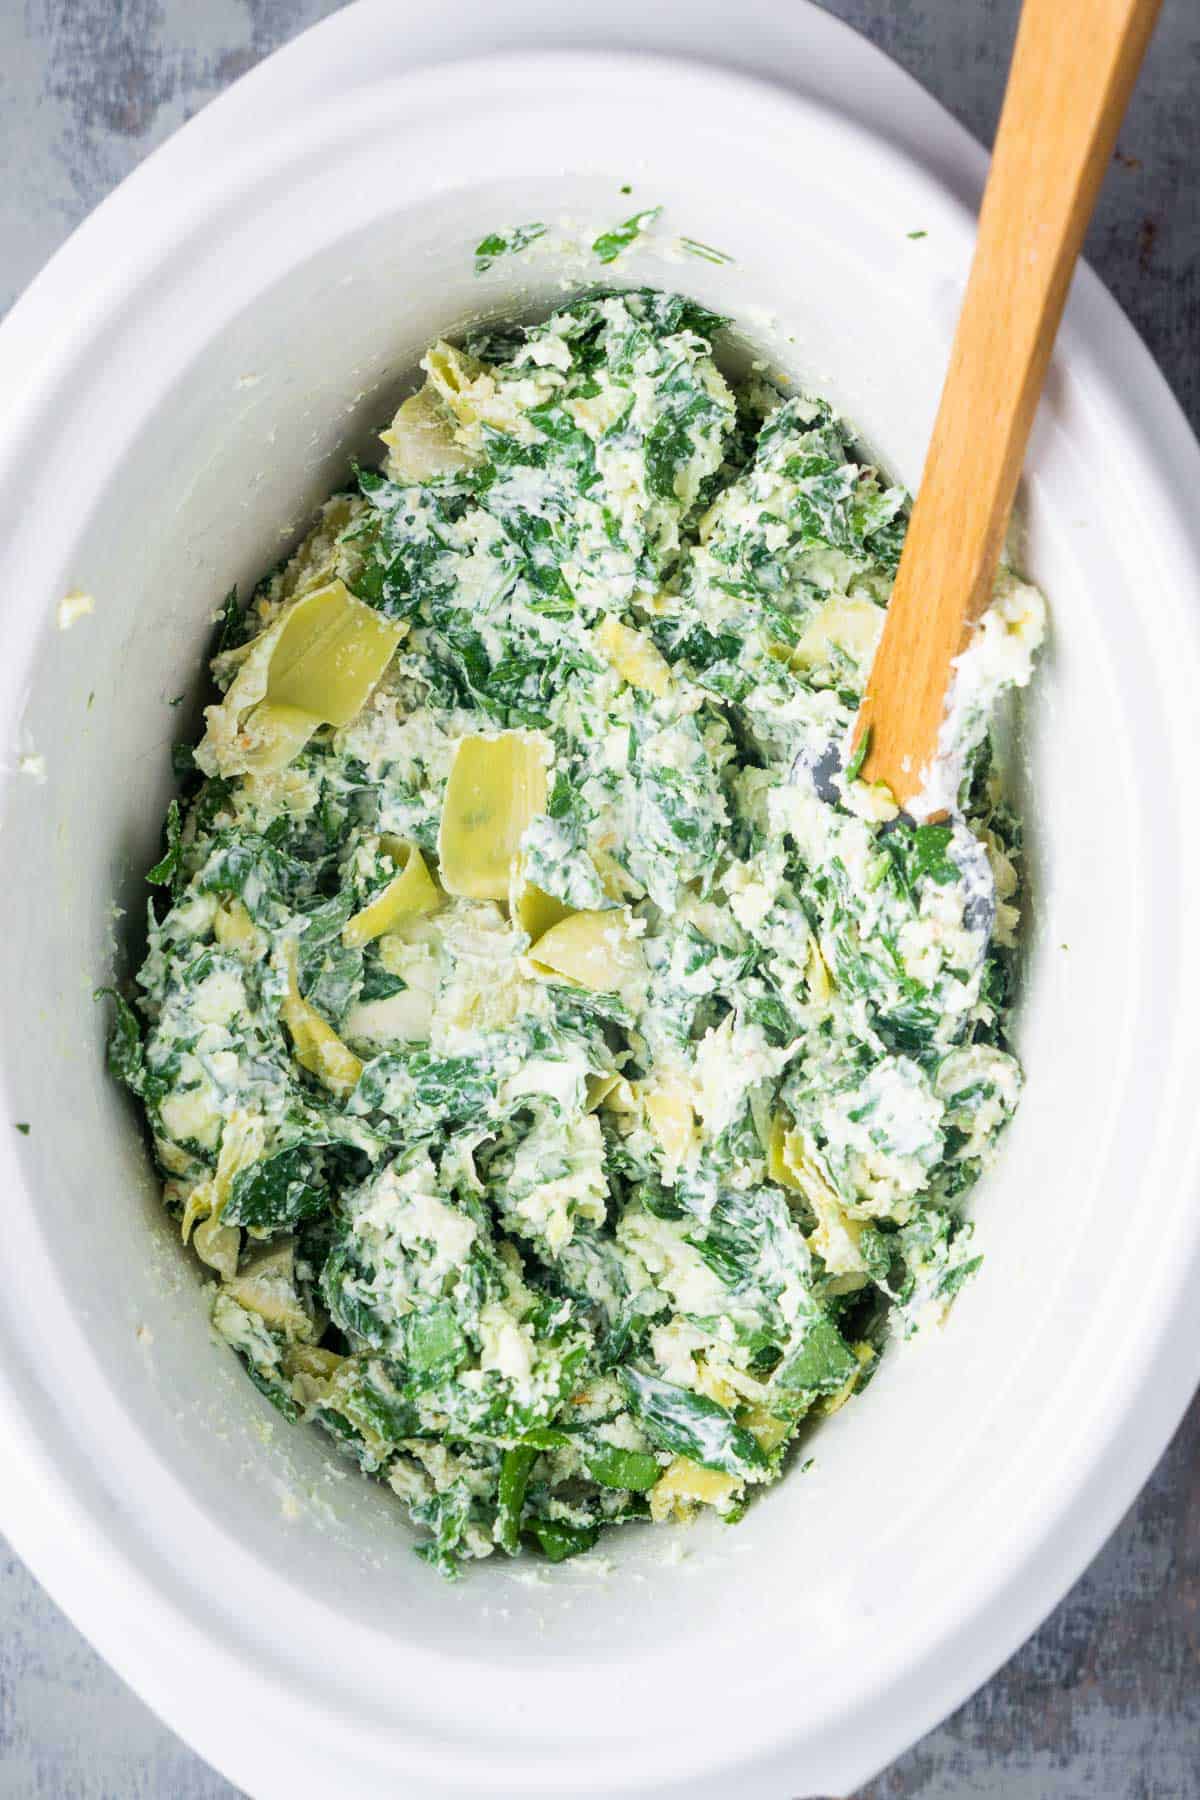 Spinach artichoke dip ingredients are stirred in slow cooker